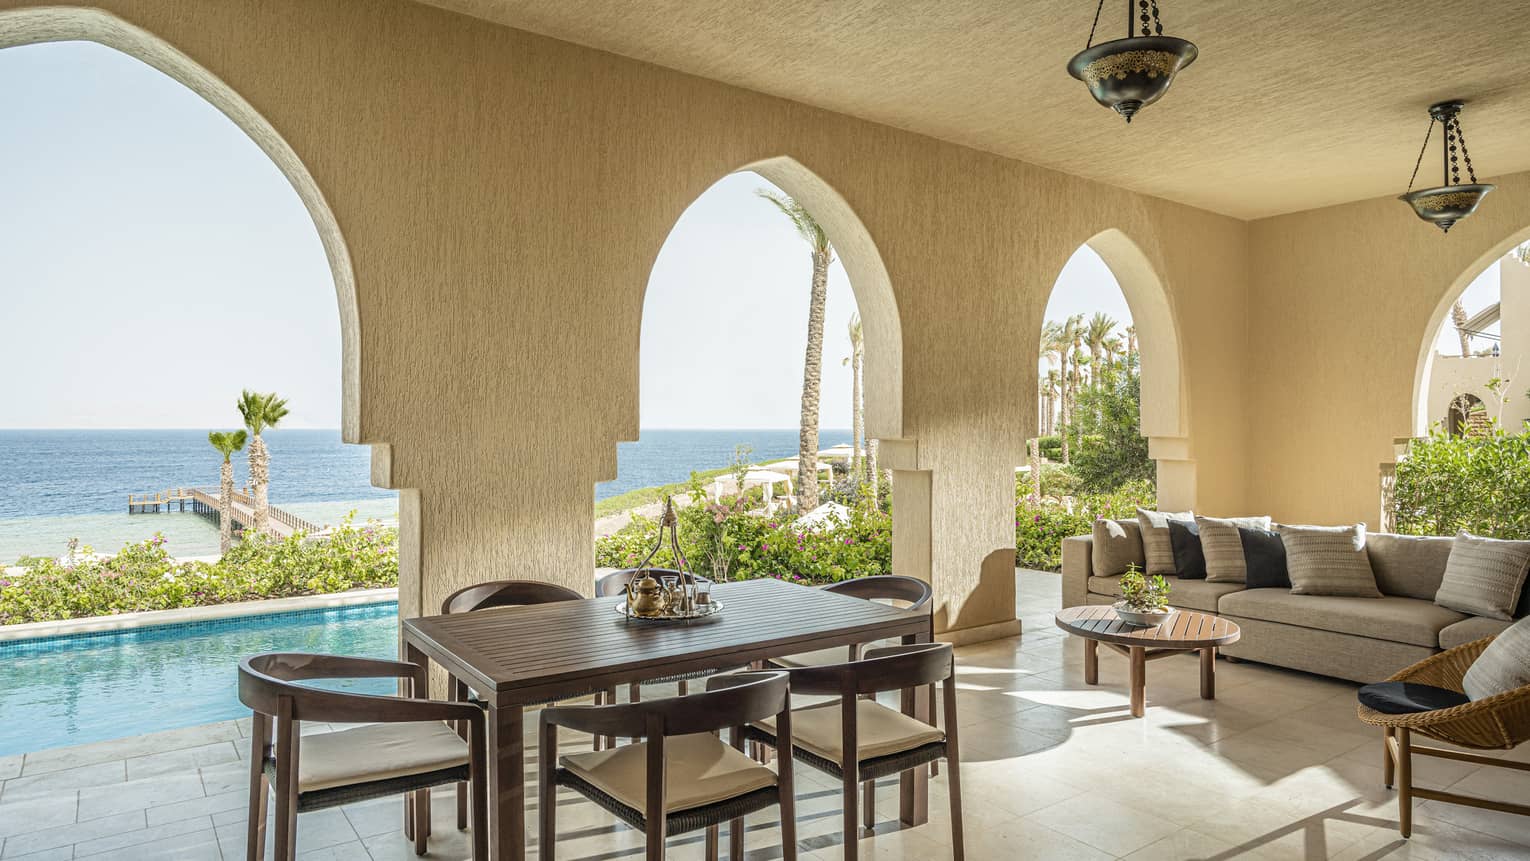 Imperial Suite terrace with cafe table, cream sectional sofa, archway leading to pool, views of the Red Sea